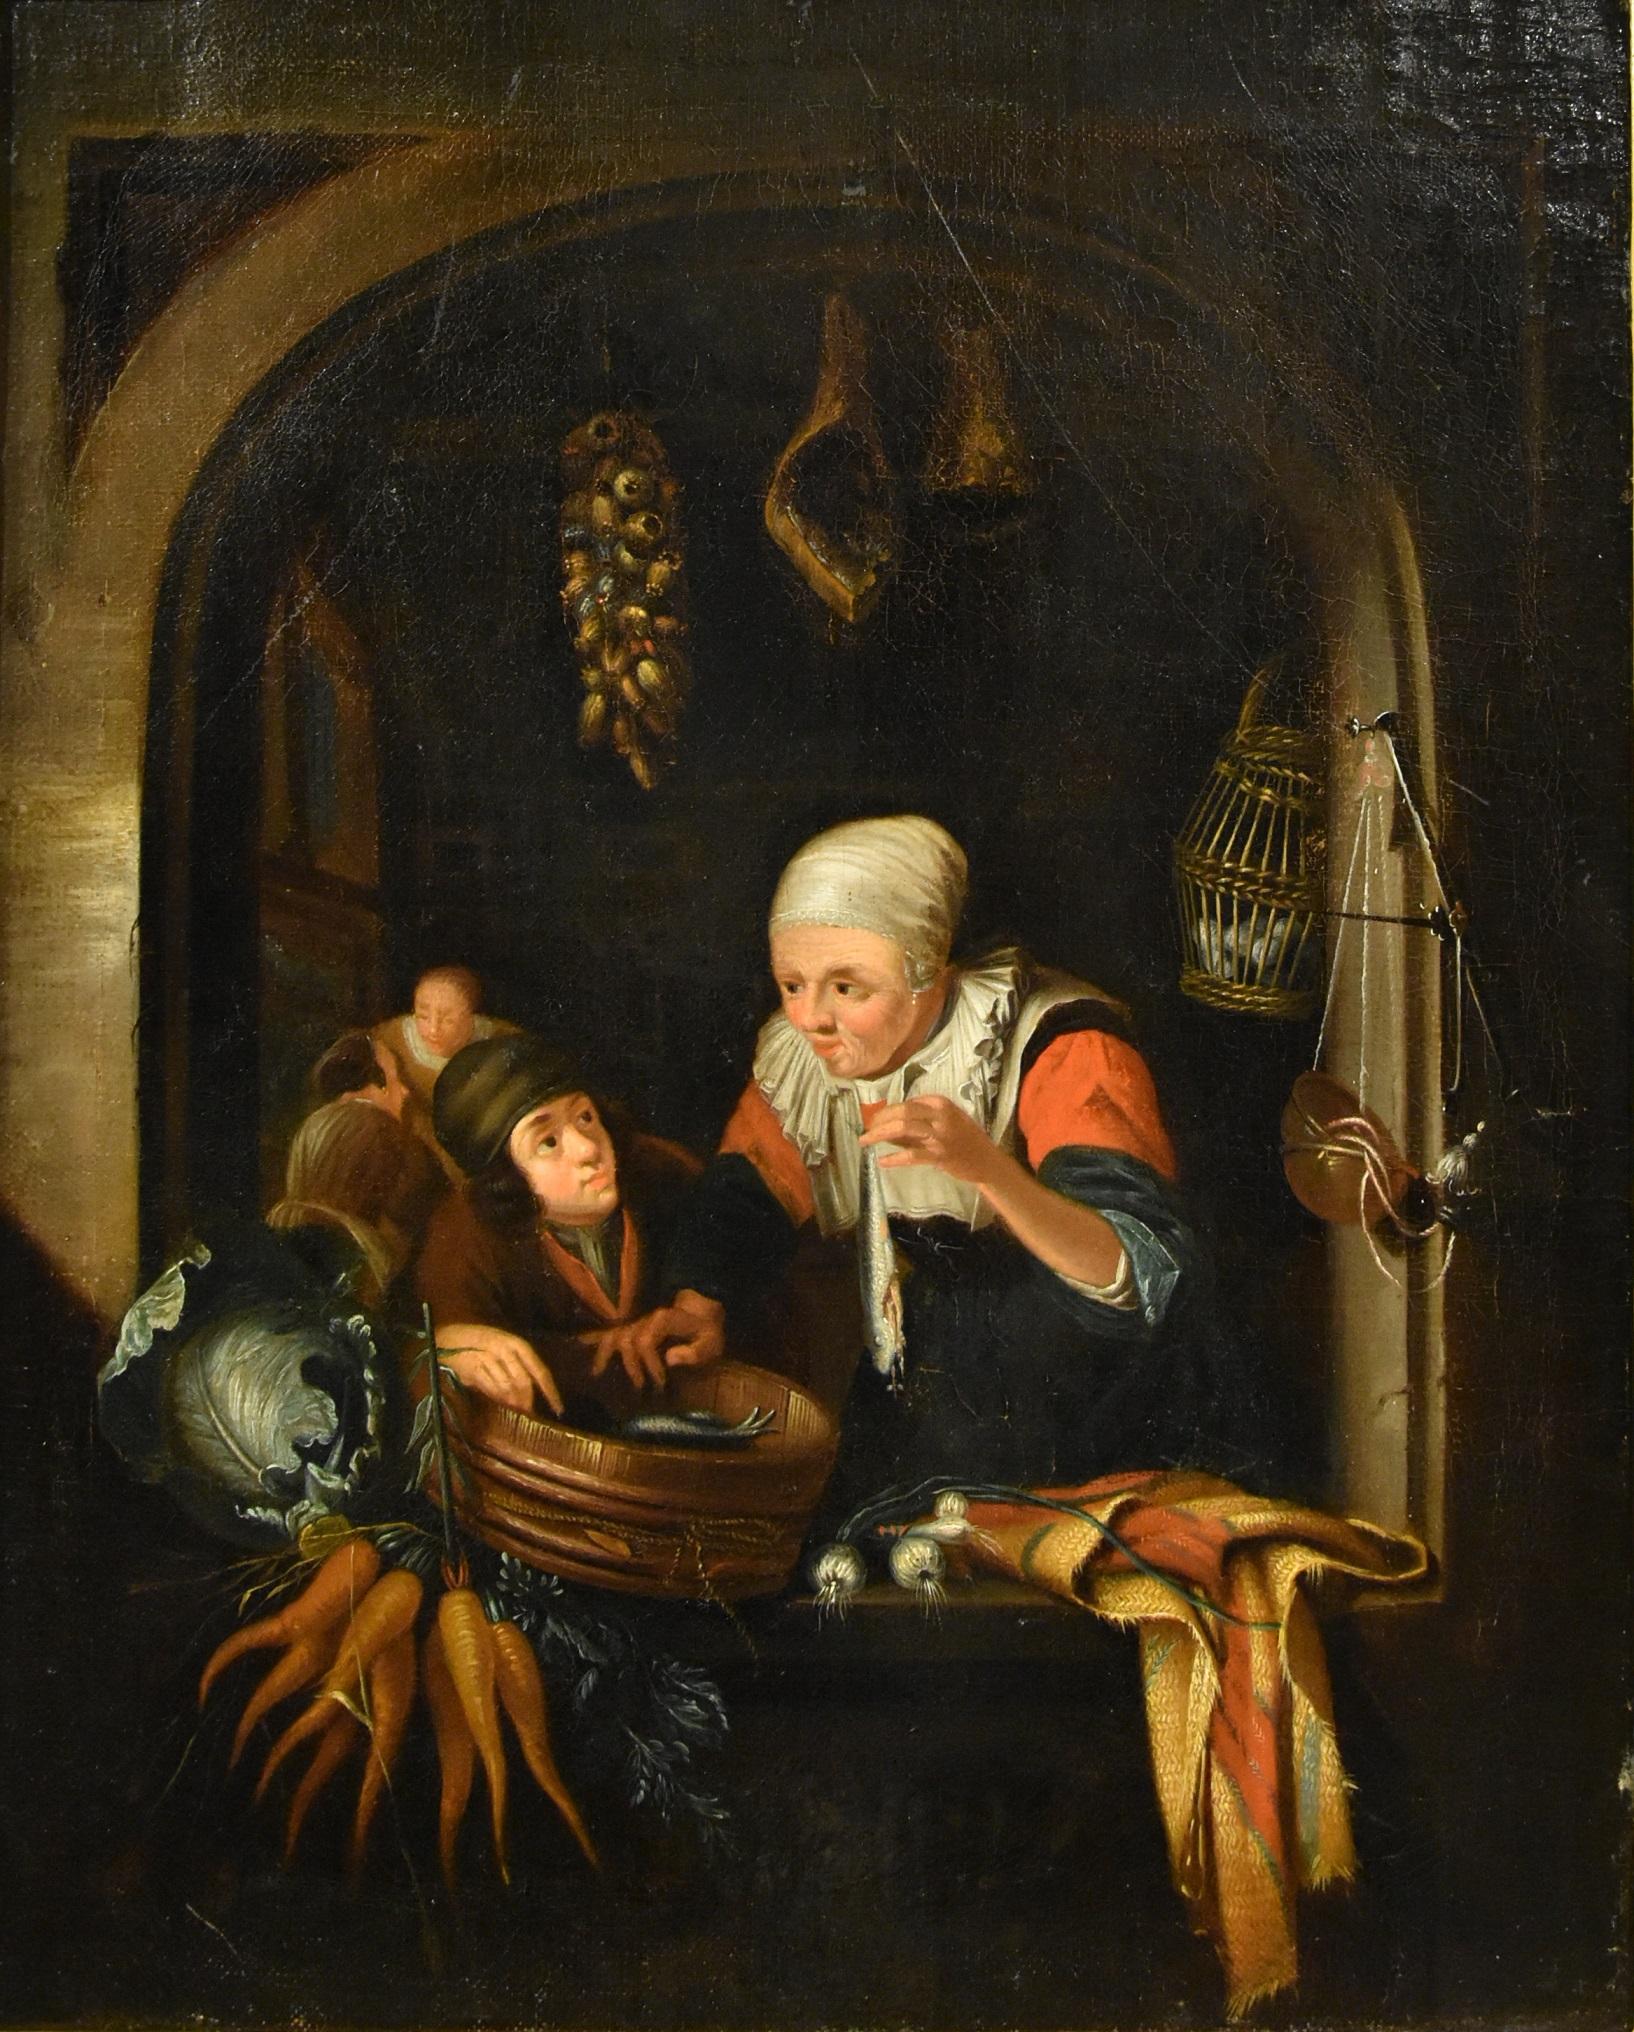 Follower of Gerard Dou (Leiden 1613 - 1675)
Pair of genre scenes at the window
b) Old woman at the window, next to her a boy playing by catching a mouse
a) Seller of herring with child in the arch of a window

Early 18th century
Oil on canvas, 47 x